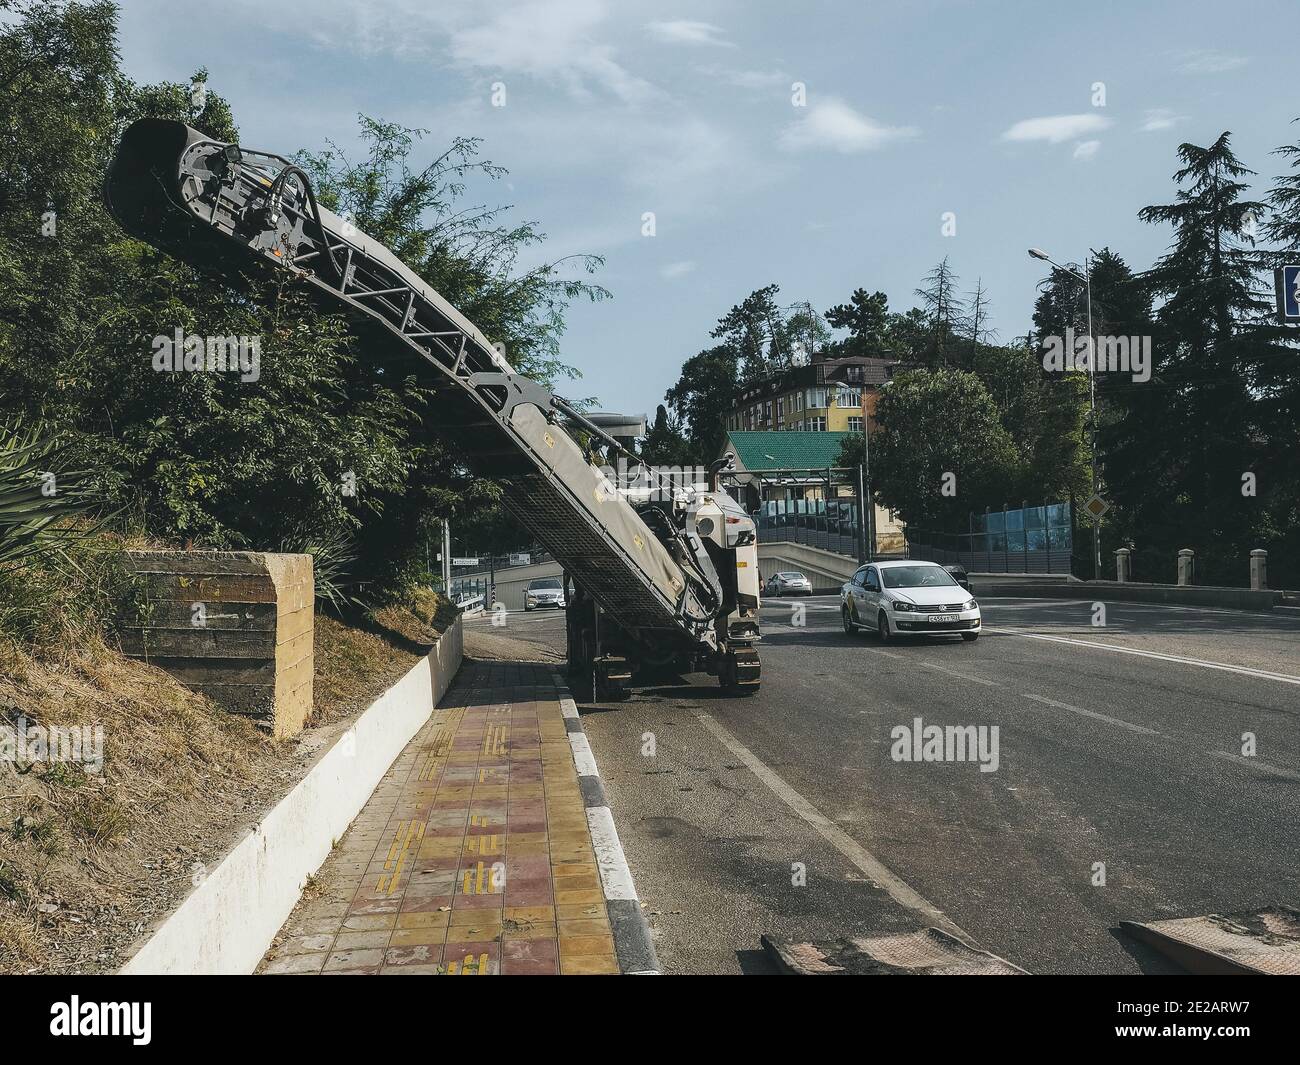 Russia, Sochi 05.07.2020. A road milling machine stands on the side of road in a city with passing cars and green trees in the background Stock Photo